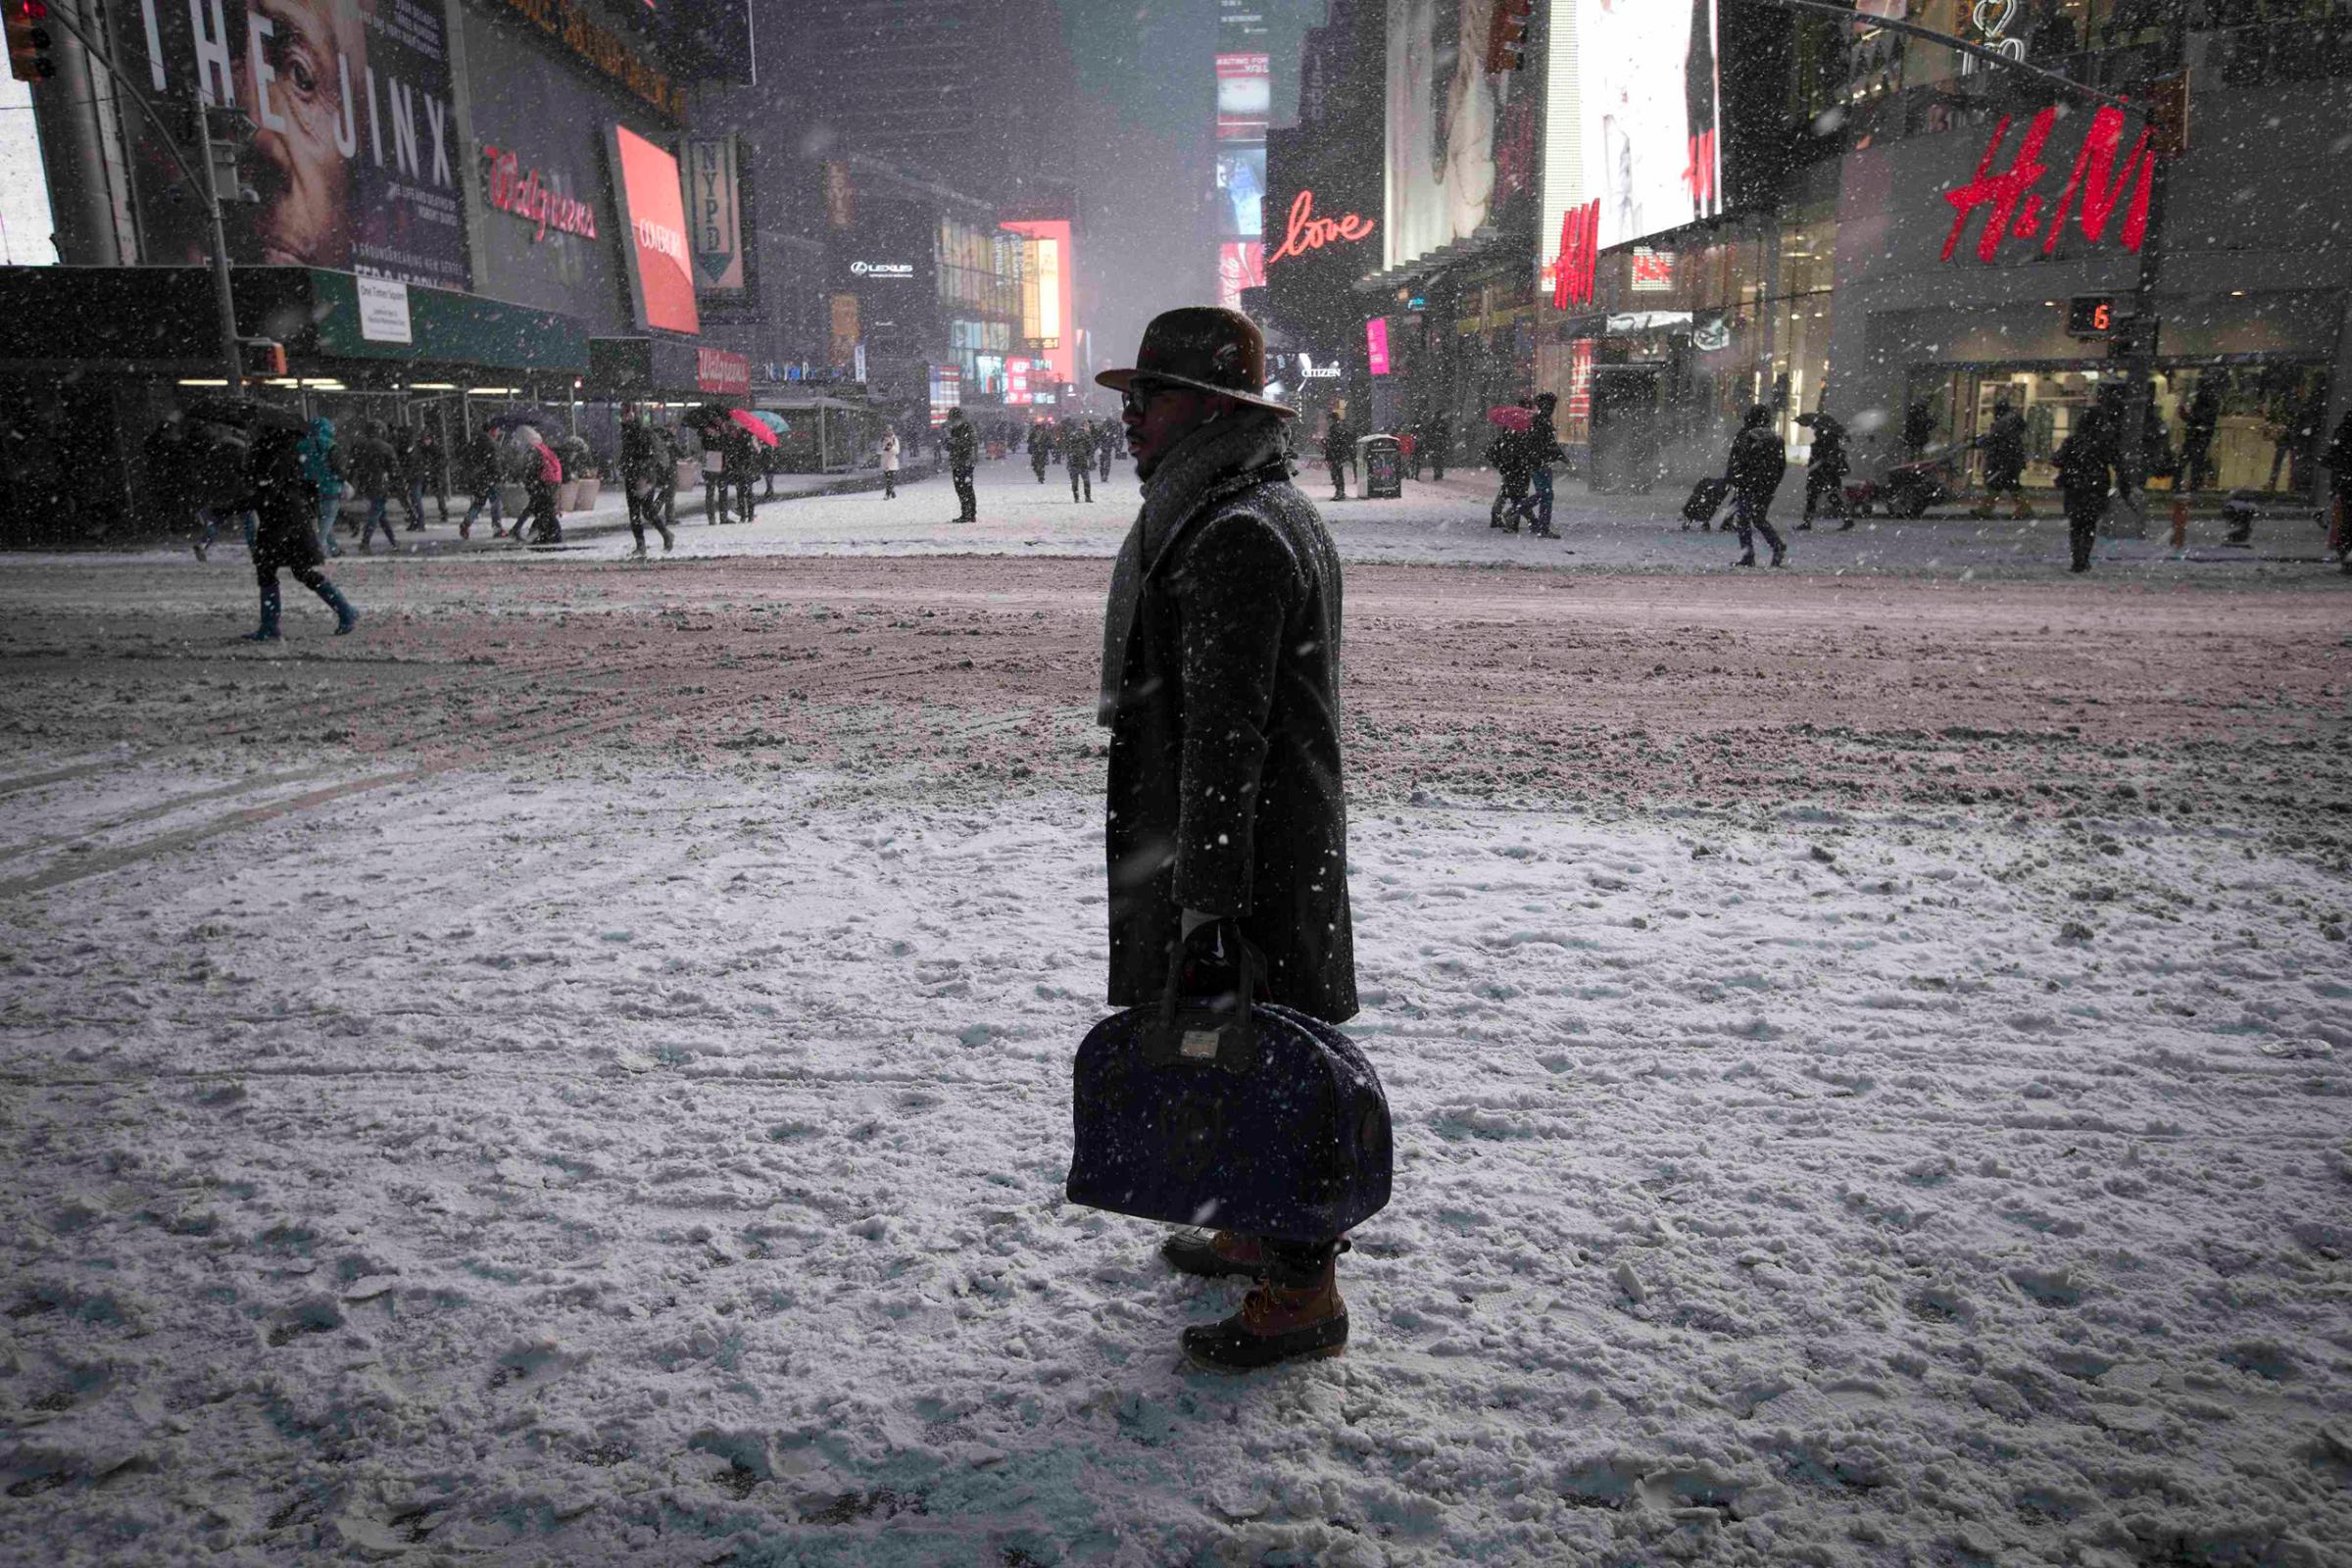 A man stands in falling snow on West 42nd street in Times Square in New York